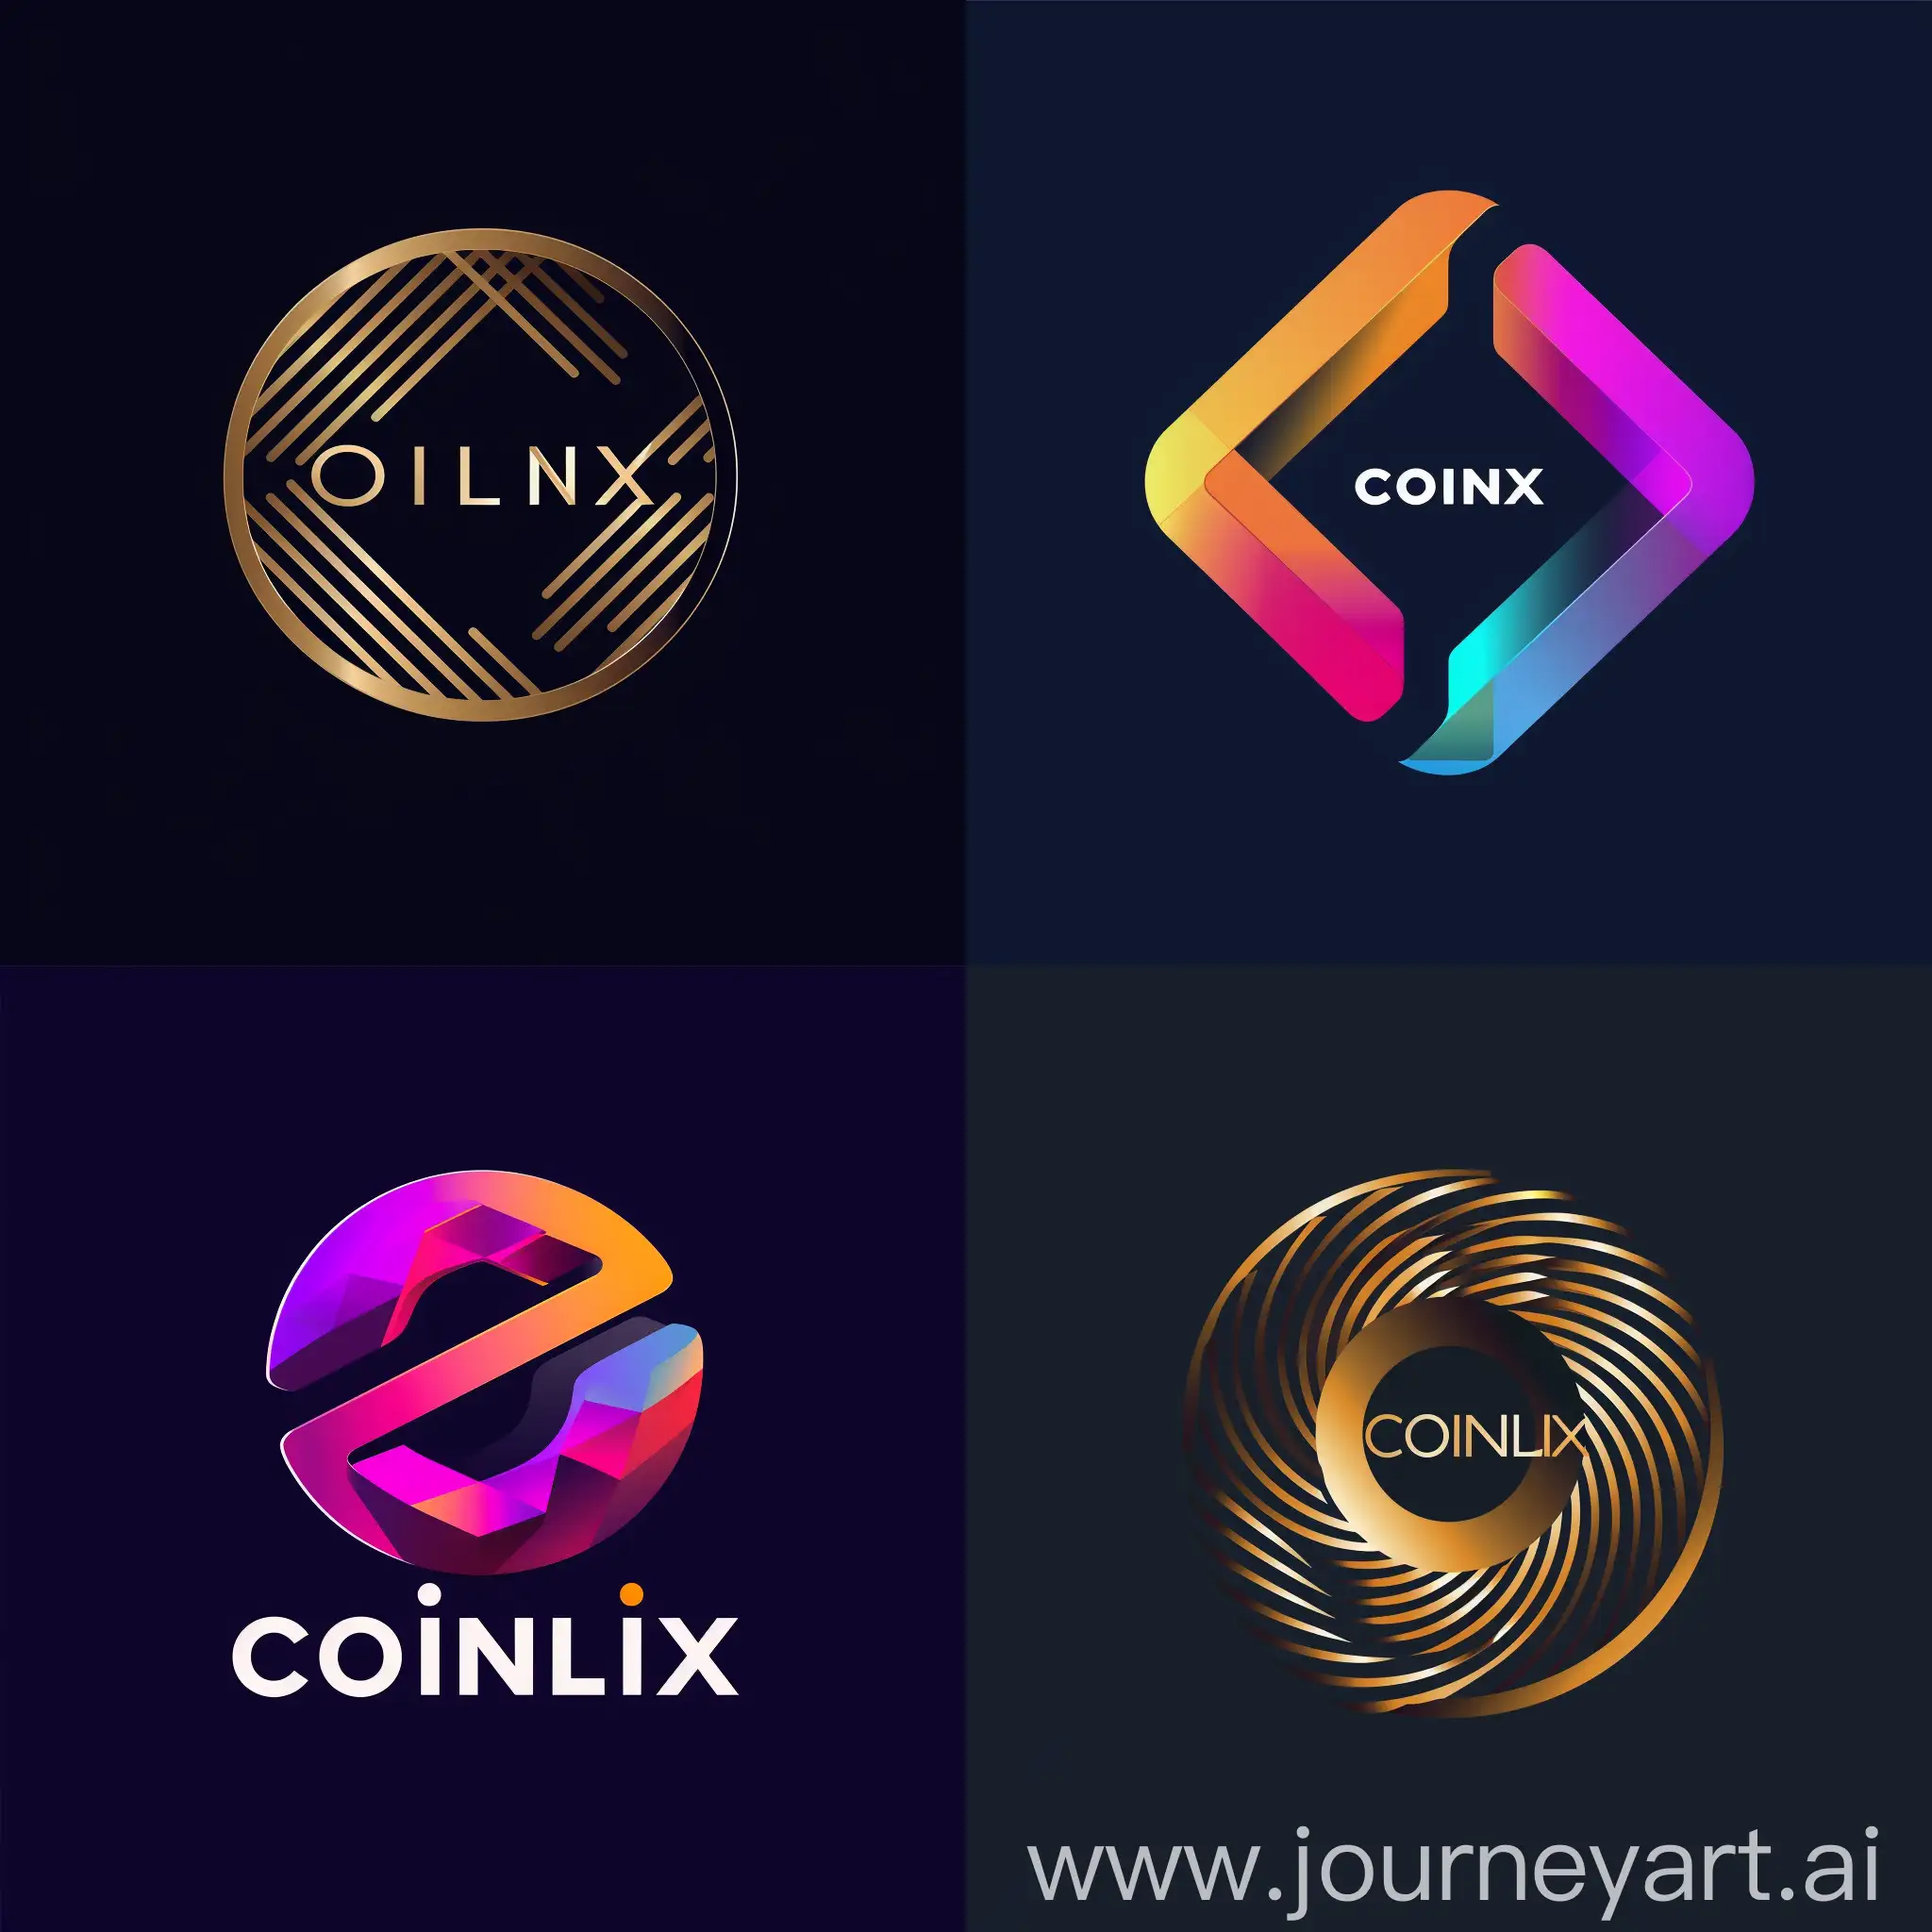 Create logo with name "coinlix". Logo may appearance modern future